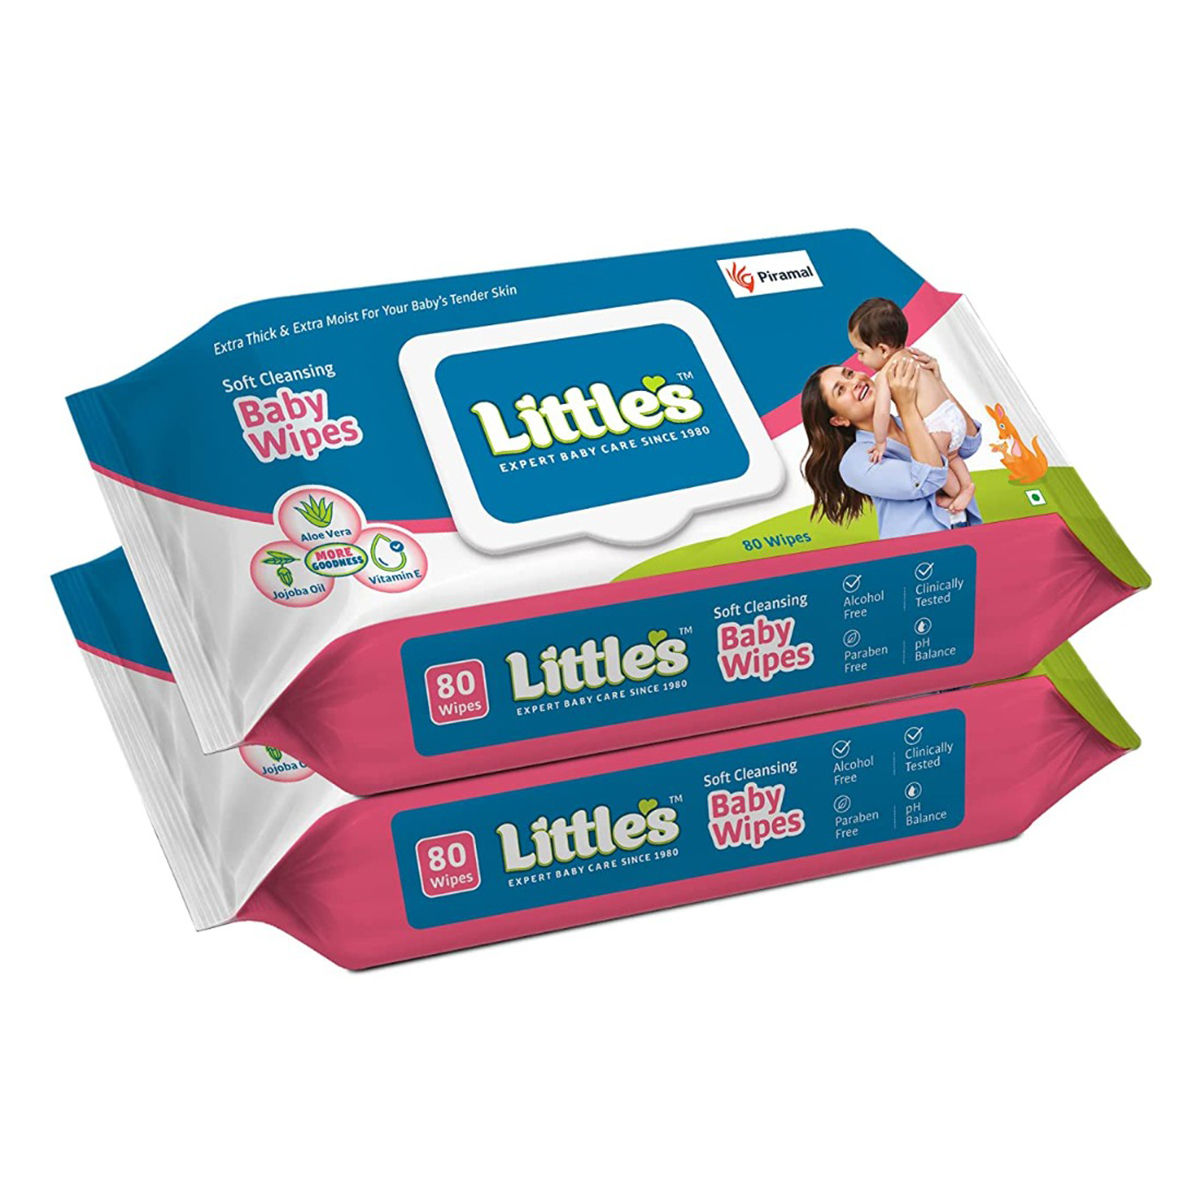 Buy Little's Soft Cleansing Baby Wipes Lid, 160 (2x80) Online